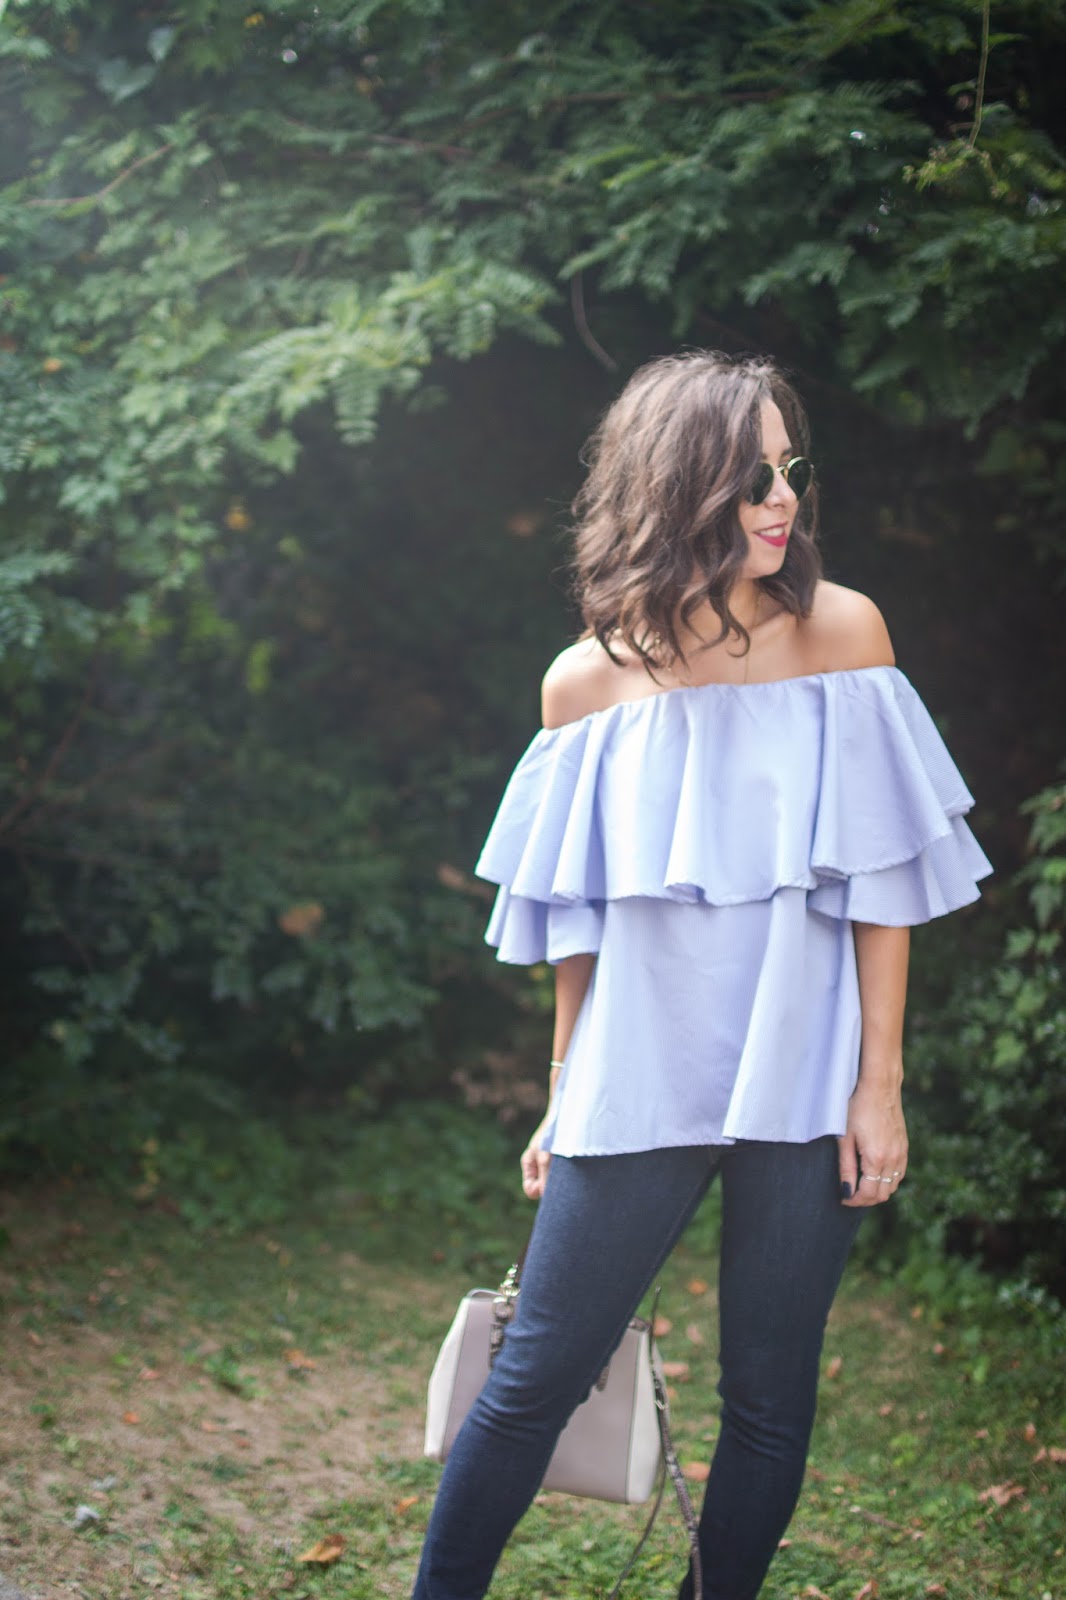 How to wear an off the shoulder top for fall. | A.Viza Style | shein off the shoulder top - autre chose platform heels -  levi high waist jeans - dc blogger